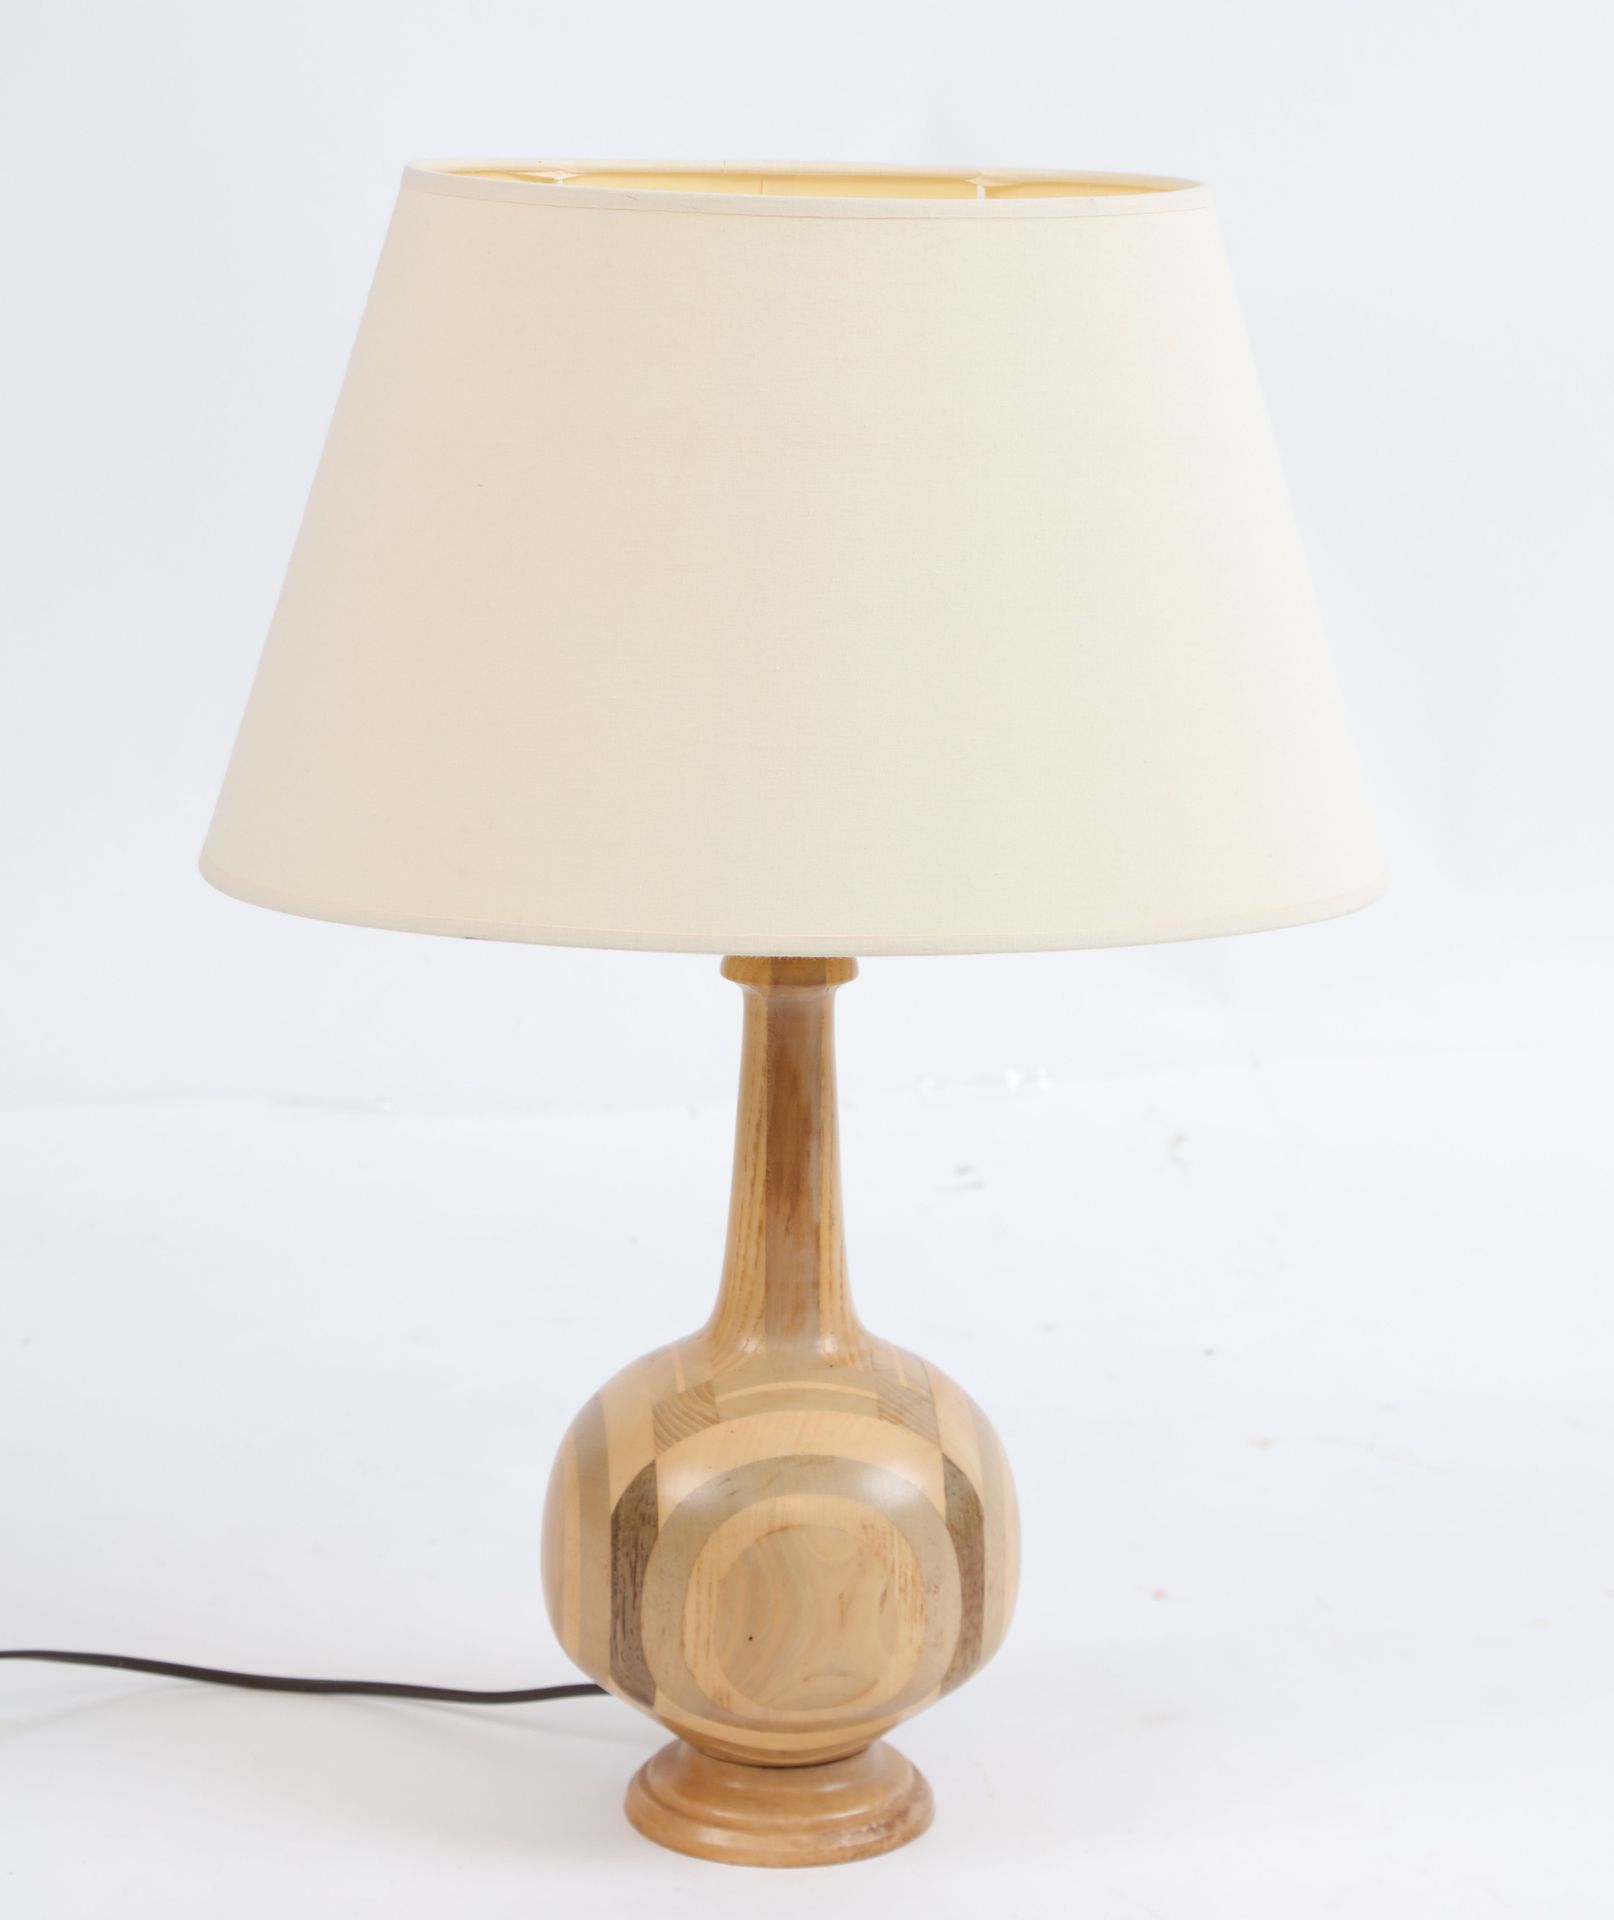 Null Lamp in natural wood (various wood species). Height : 48 cm.